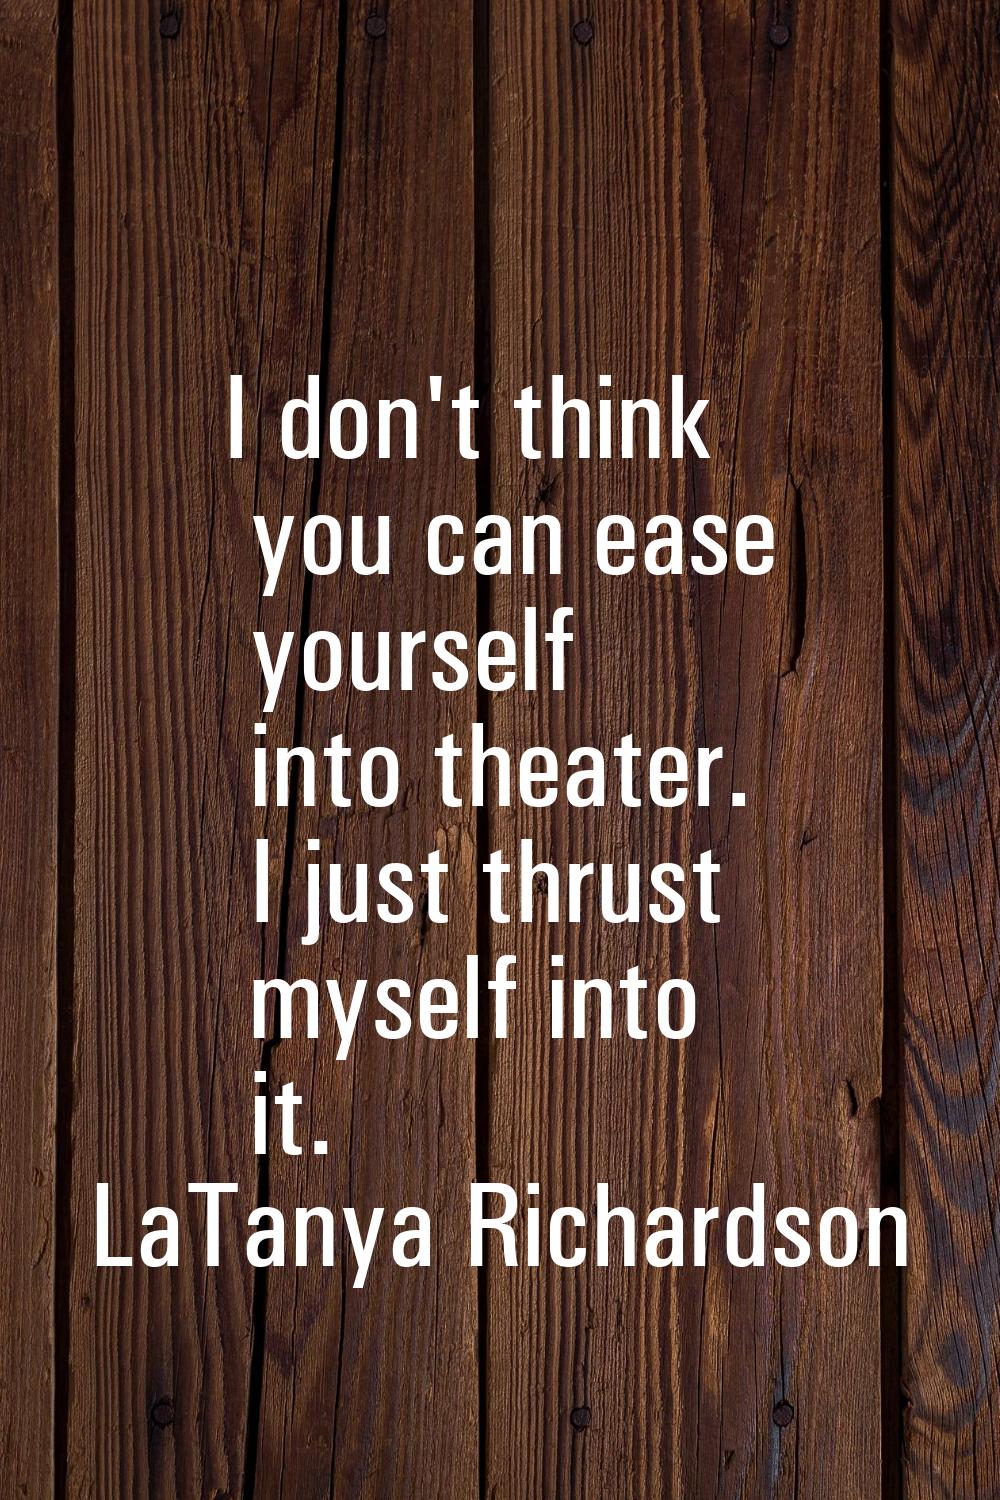 I don't think you can ease yourself into theater. I just thrust myself into it.